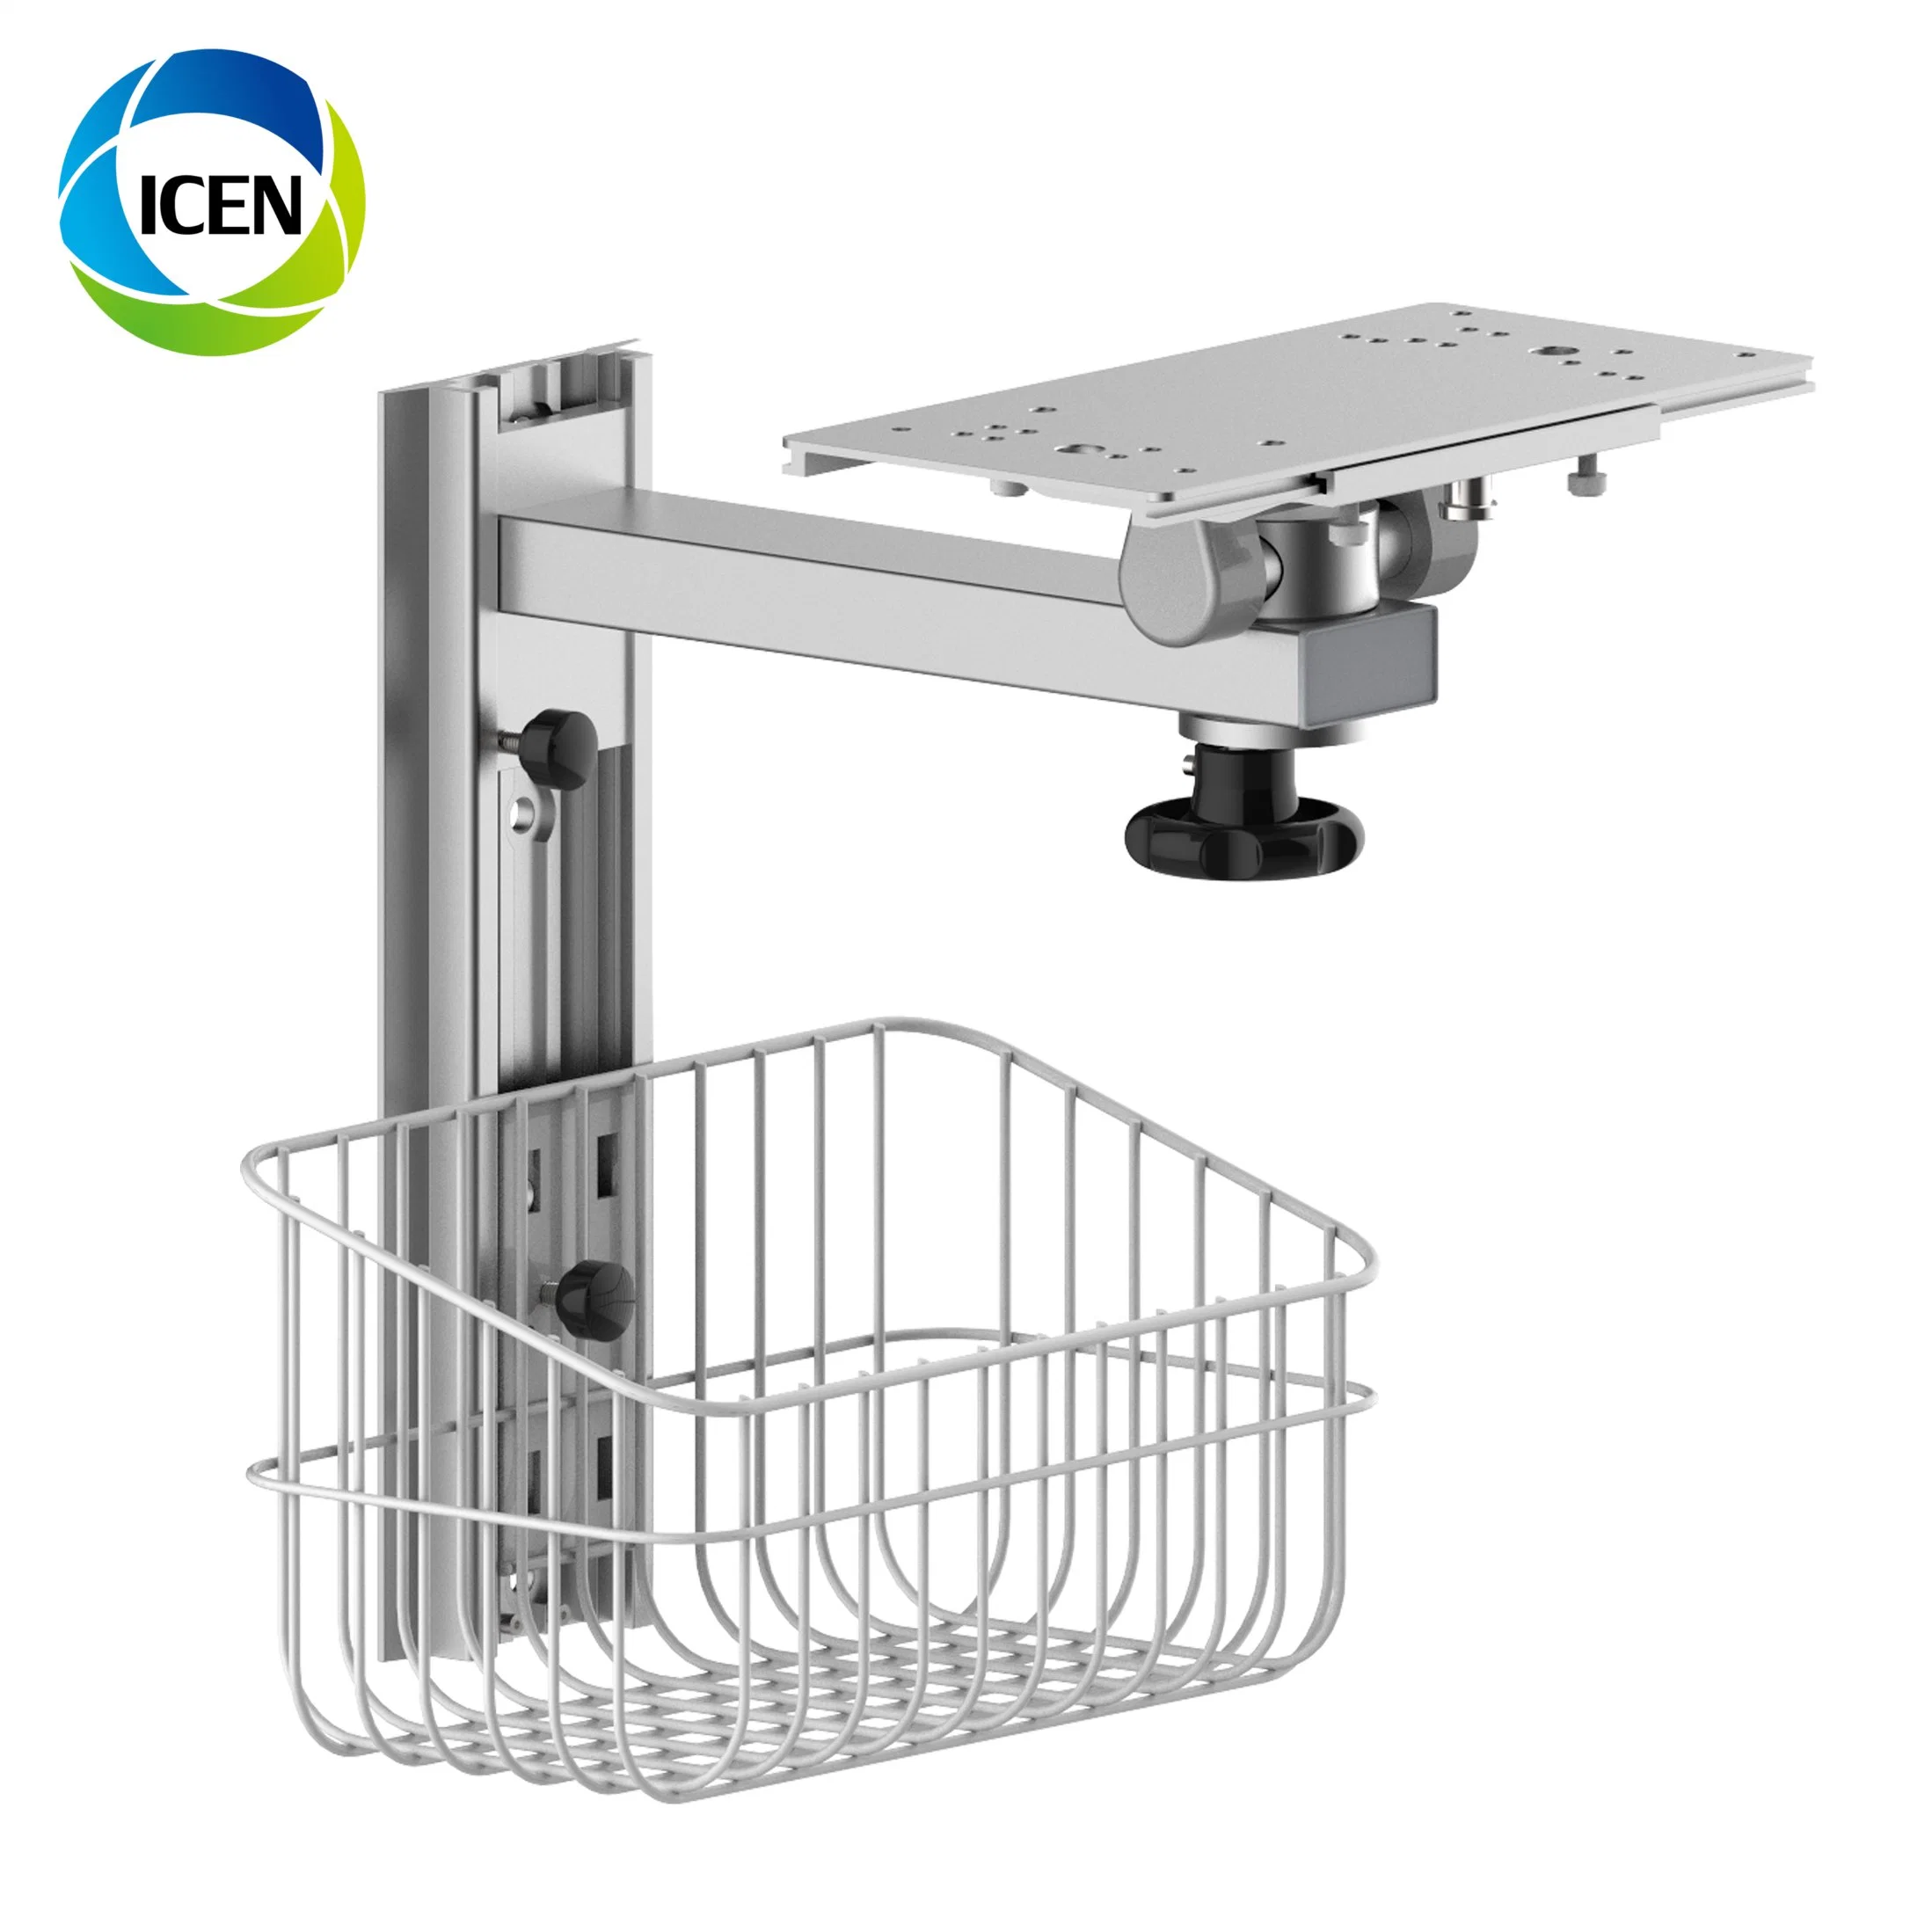 IN-C2 Portable ICU Metal Patient Monitor Wall Mount